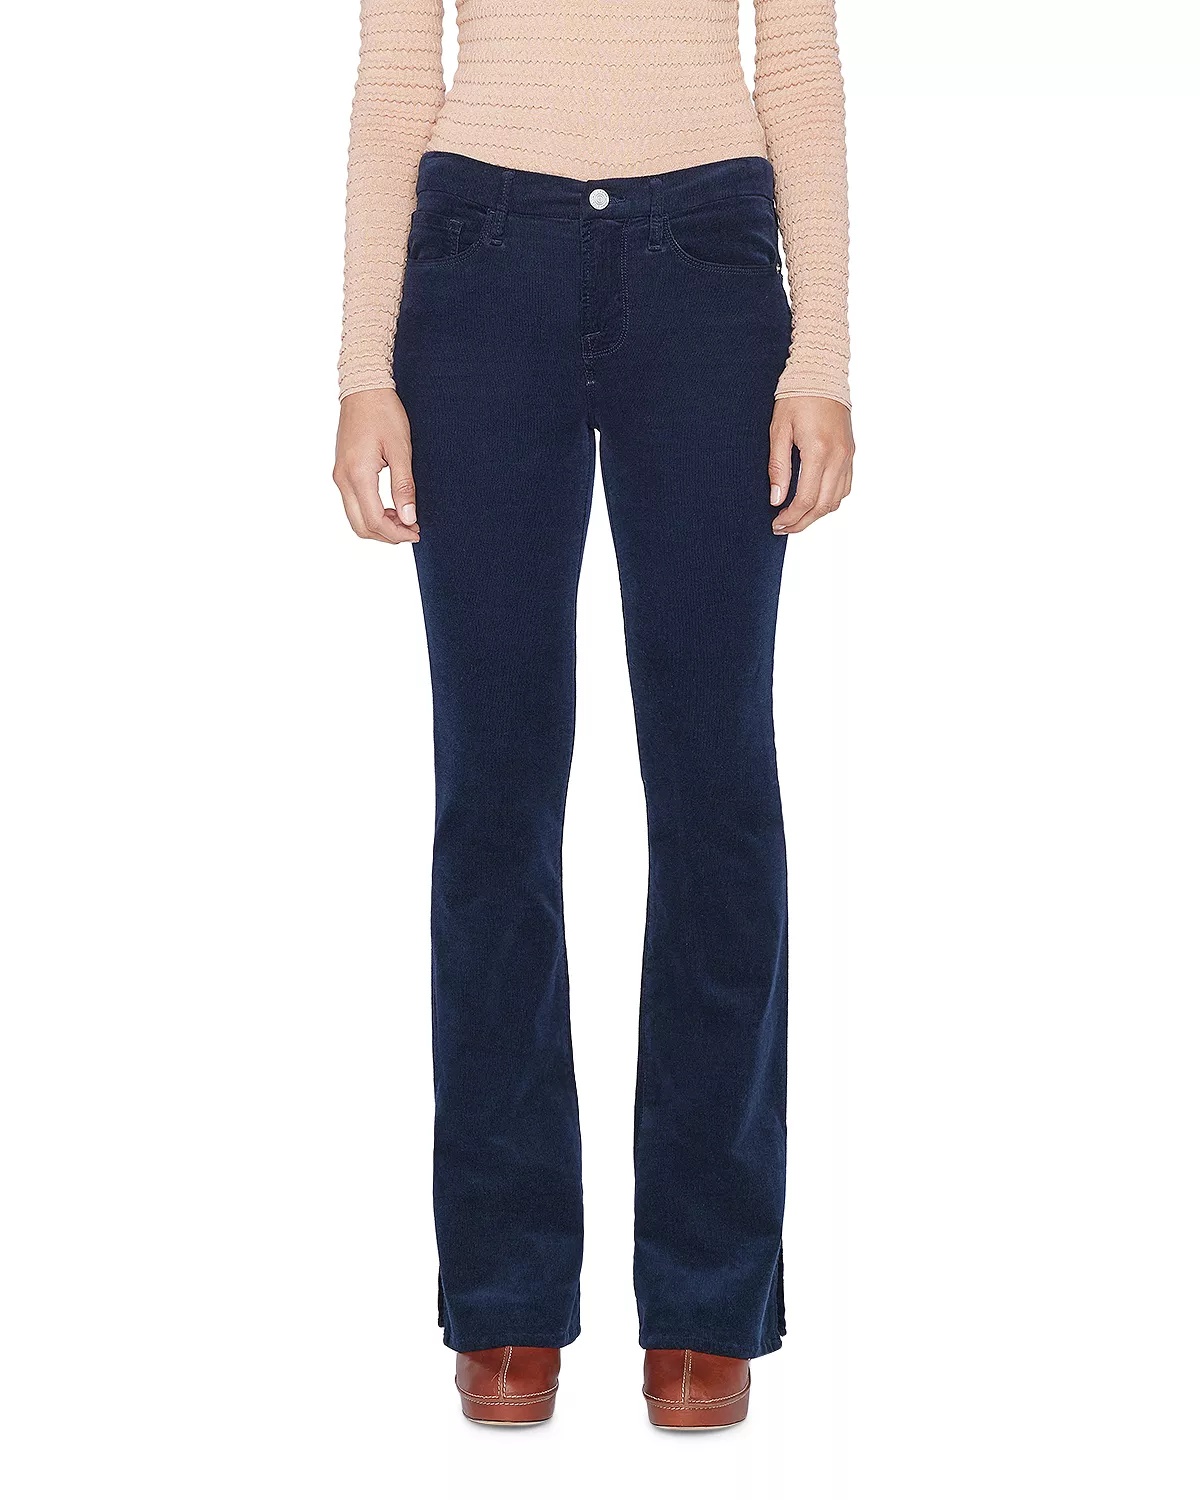 Le Mini High Rise Bootcut Jeans in Navy - 1